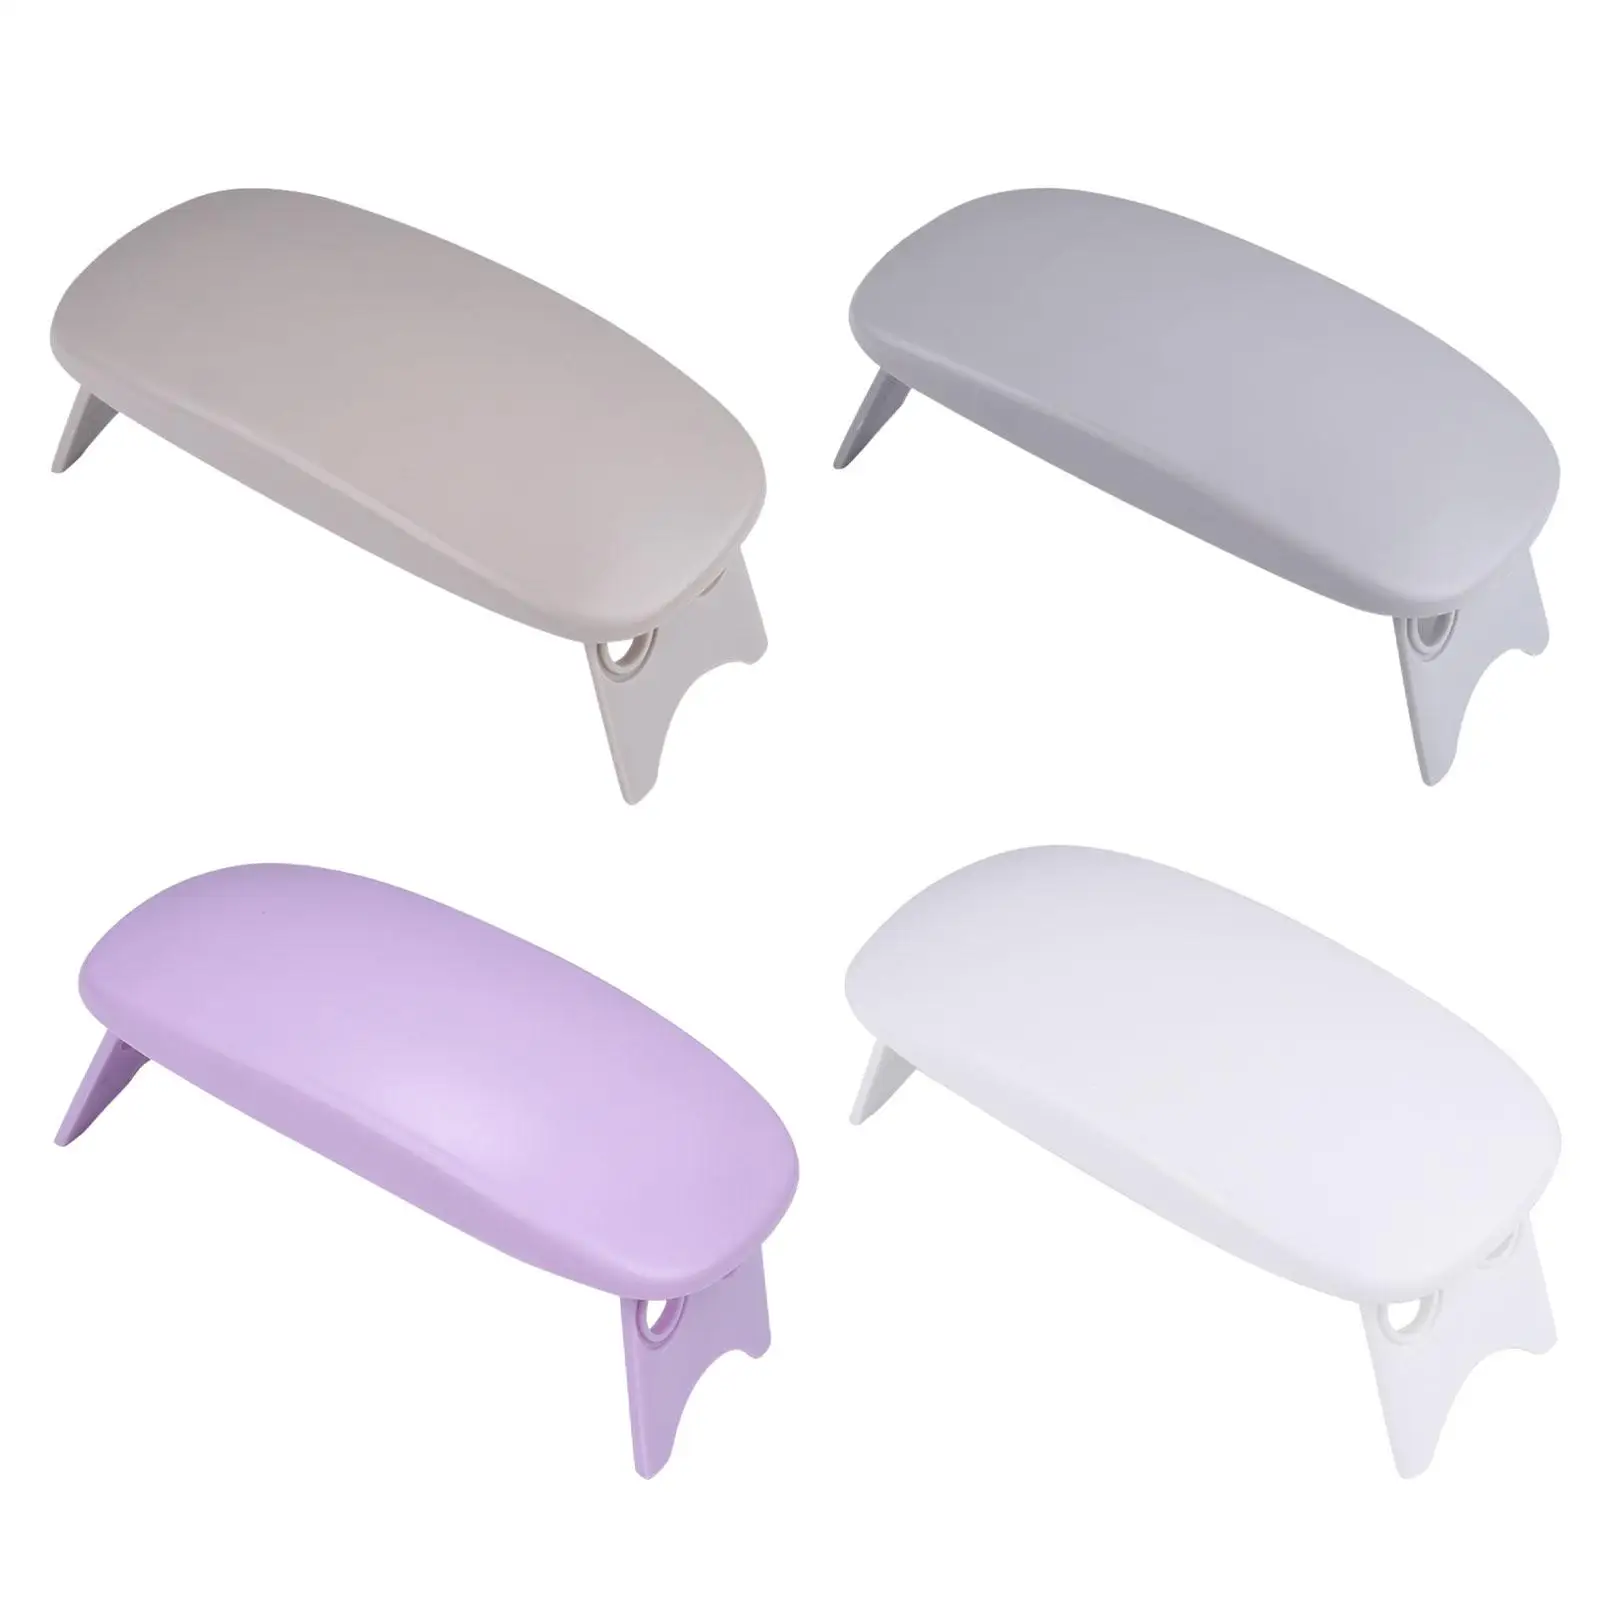 Nail Arm Rest, Folding Non Slip Comfortable Arm Rest Nail Table Manicure Hand Cushion for Salons, Valentine, DIY Birthday